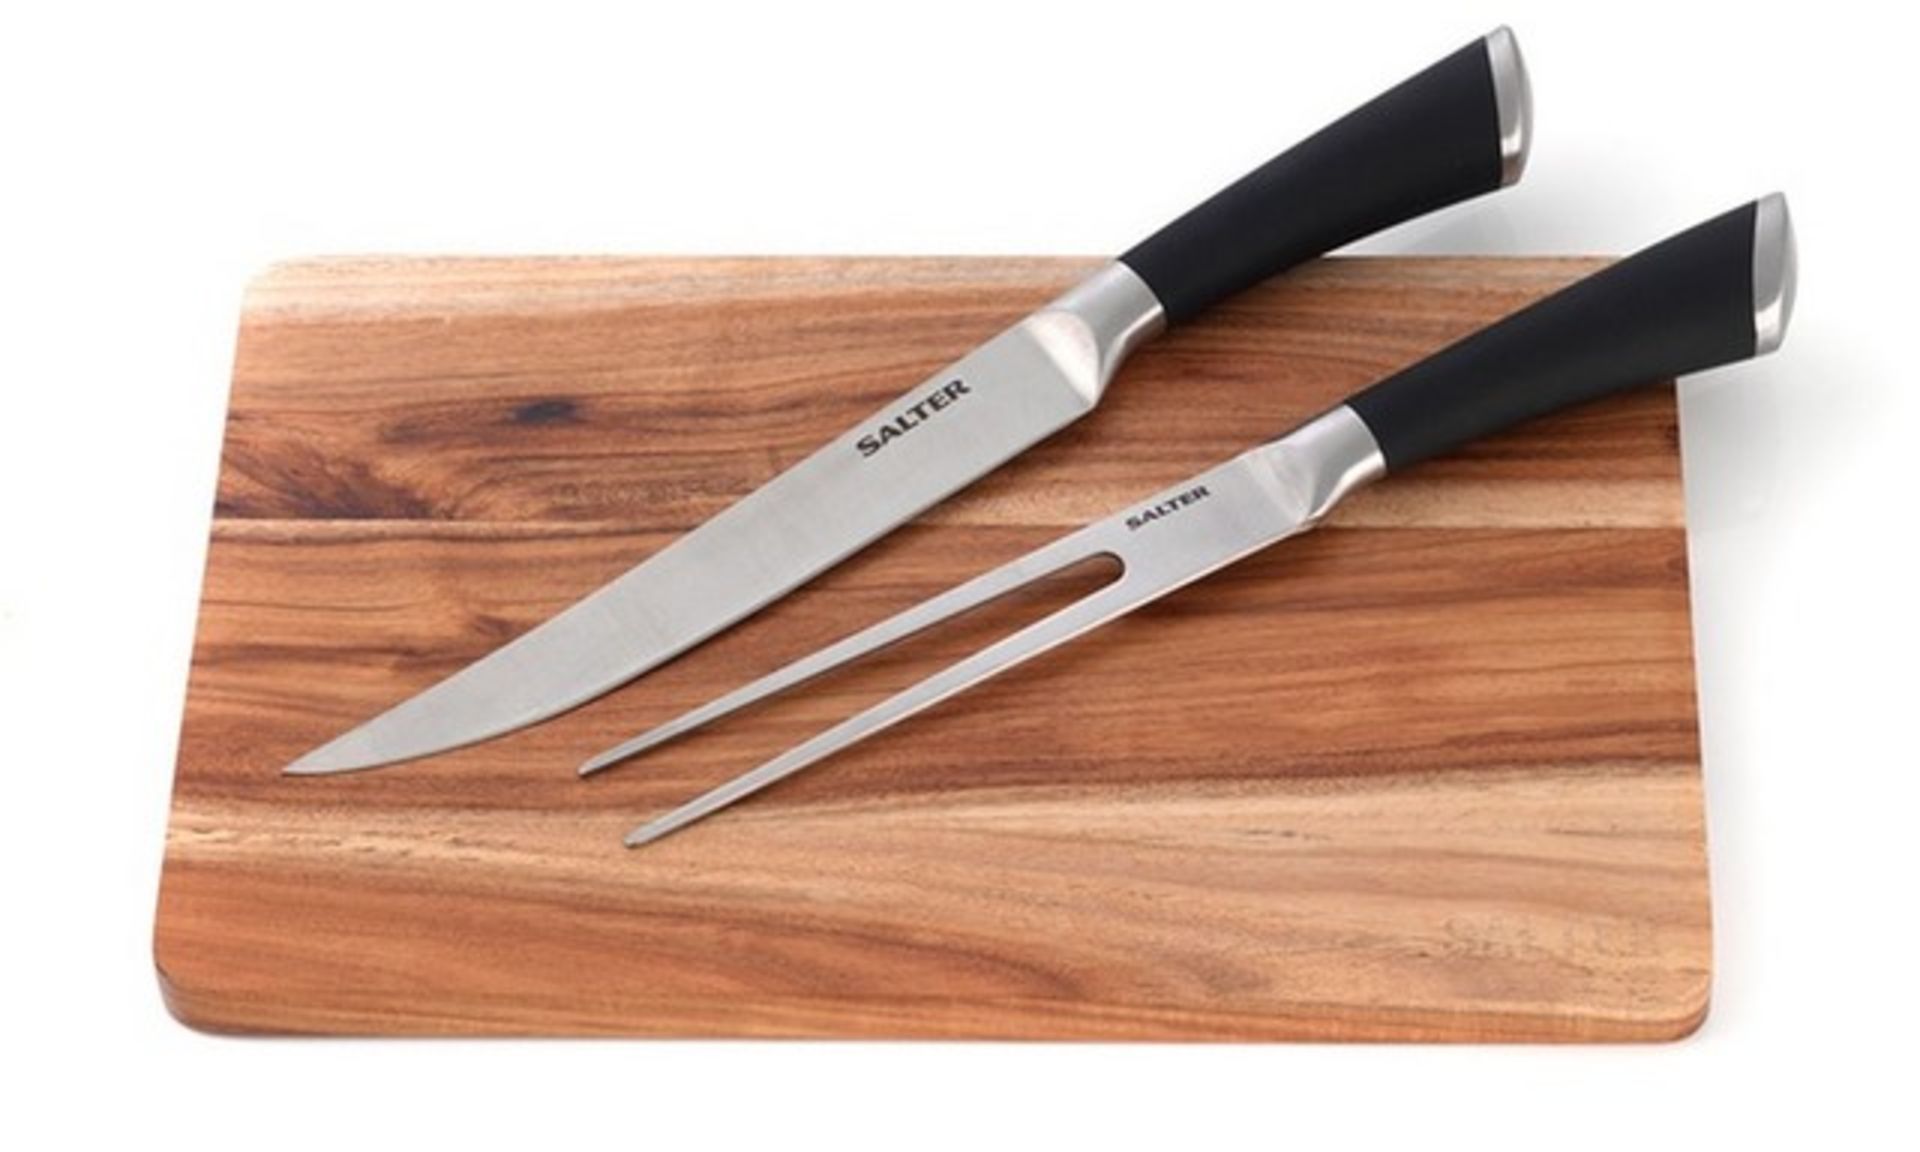 V Brand New Salter Elegance Carving Knife And Fork With Chopping Board ISP £46.99 (Mahahome.com) - Image 2 of 4